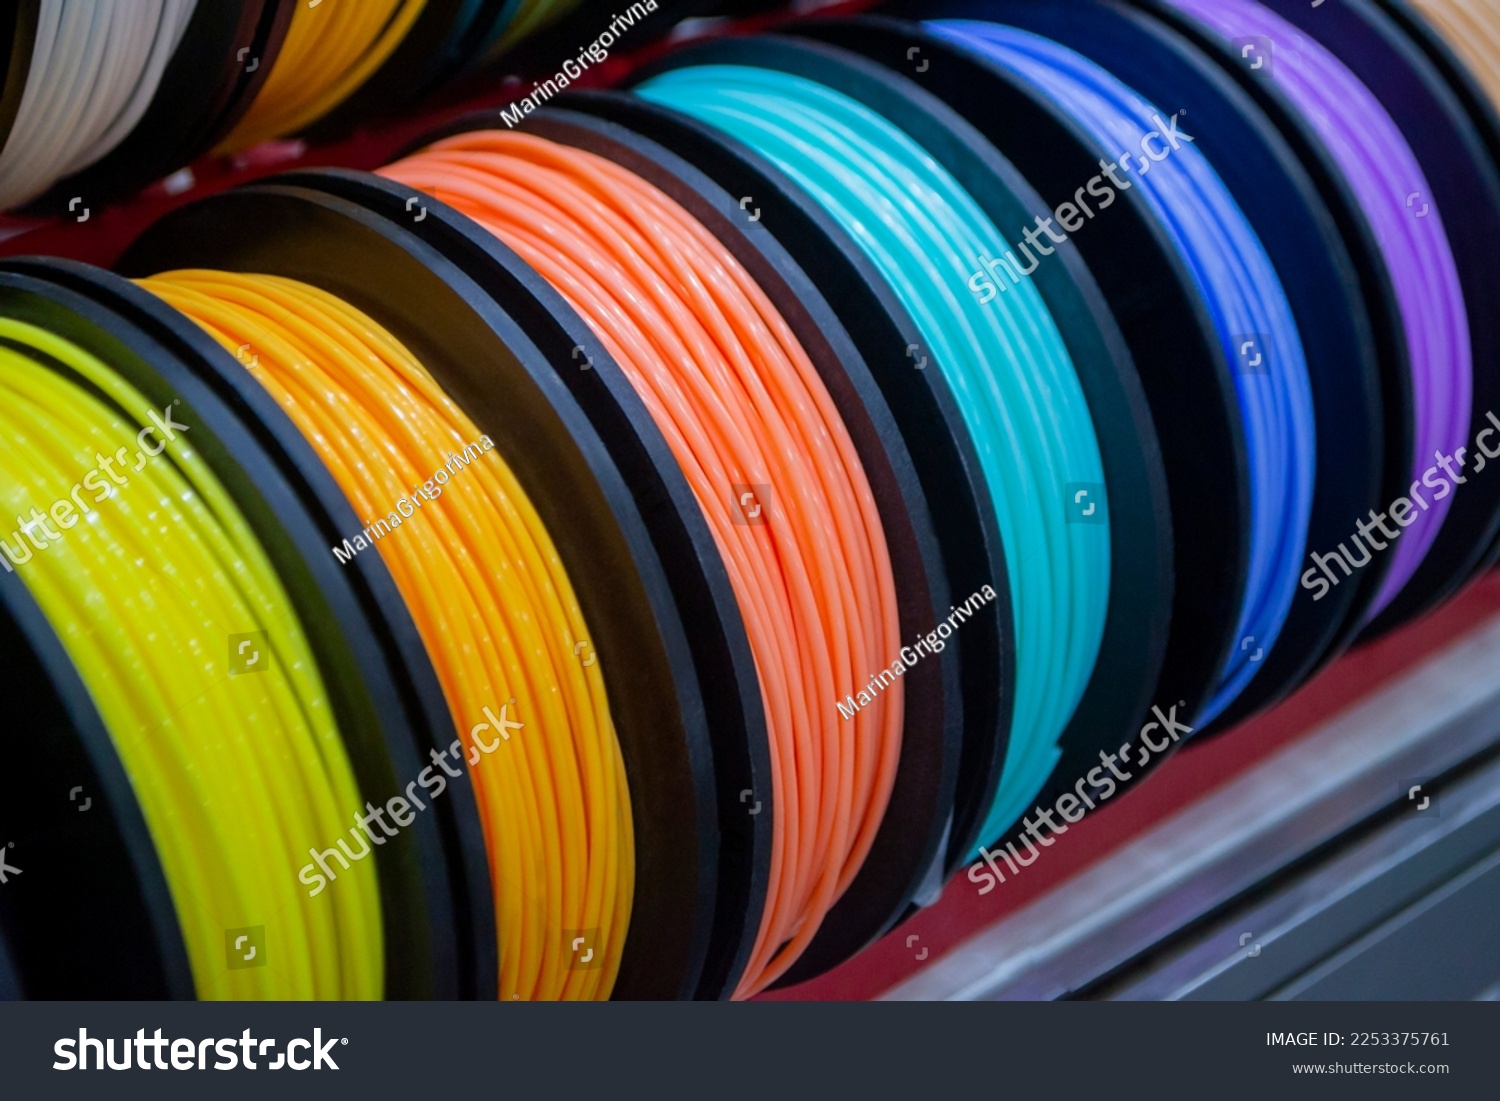 Many multi-colored spools of thread of filament for printing 3d printer. Material coils for printing 3D printer. Spools of 3D printing motley different colors filament. ABS wire plastic for 3d printer #2253375761